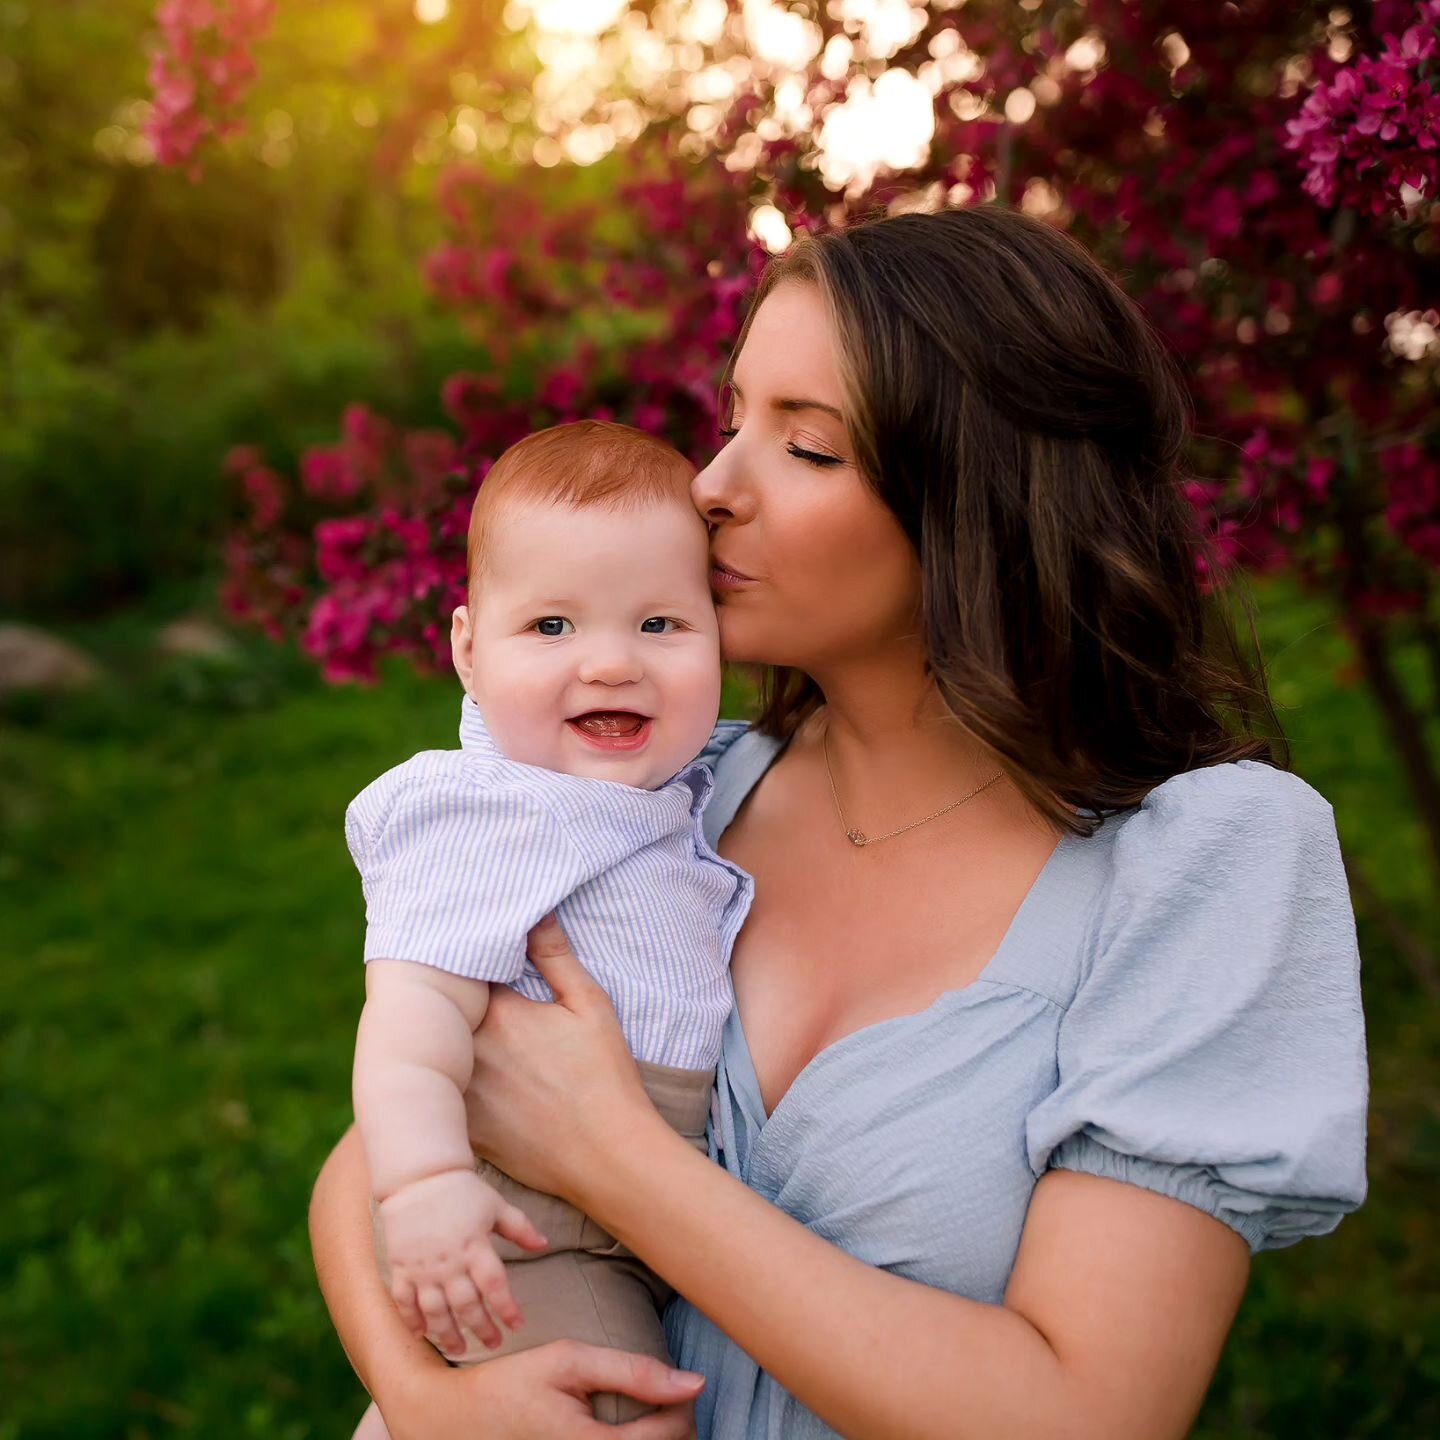 Still trying to think of what to get your favorite Mom for Mother's Day?? She wants photos, of course! I have gift cards available 😊
#mothersdaygiftideas #shewantsphotos #genevaillinois #genevail #familyportraitsession #momslove❤️ #stcharlesil #baby